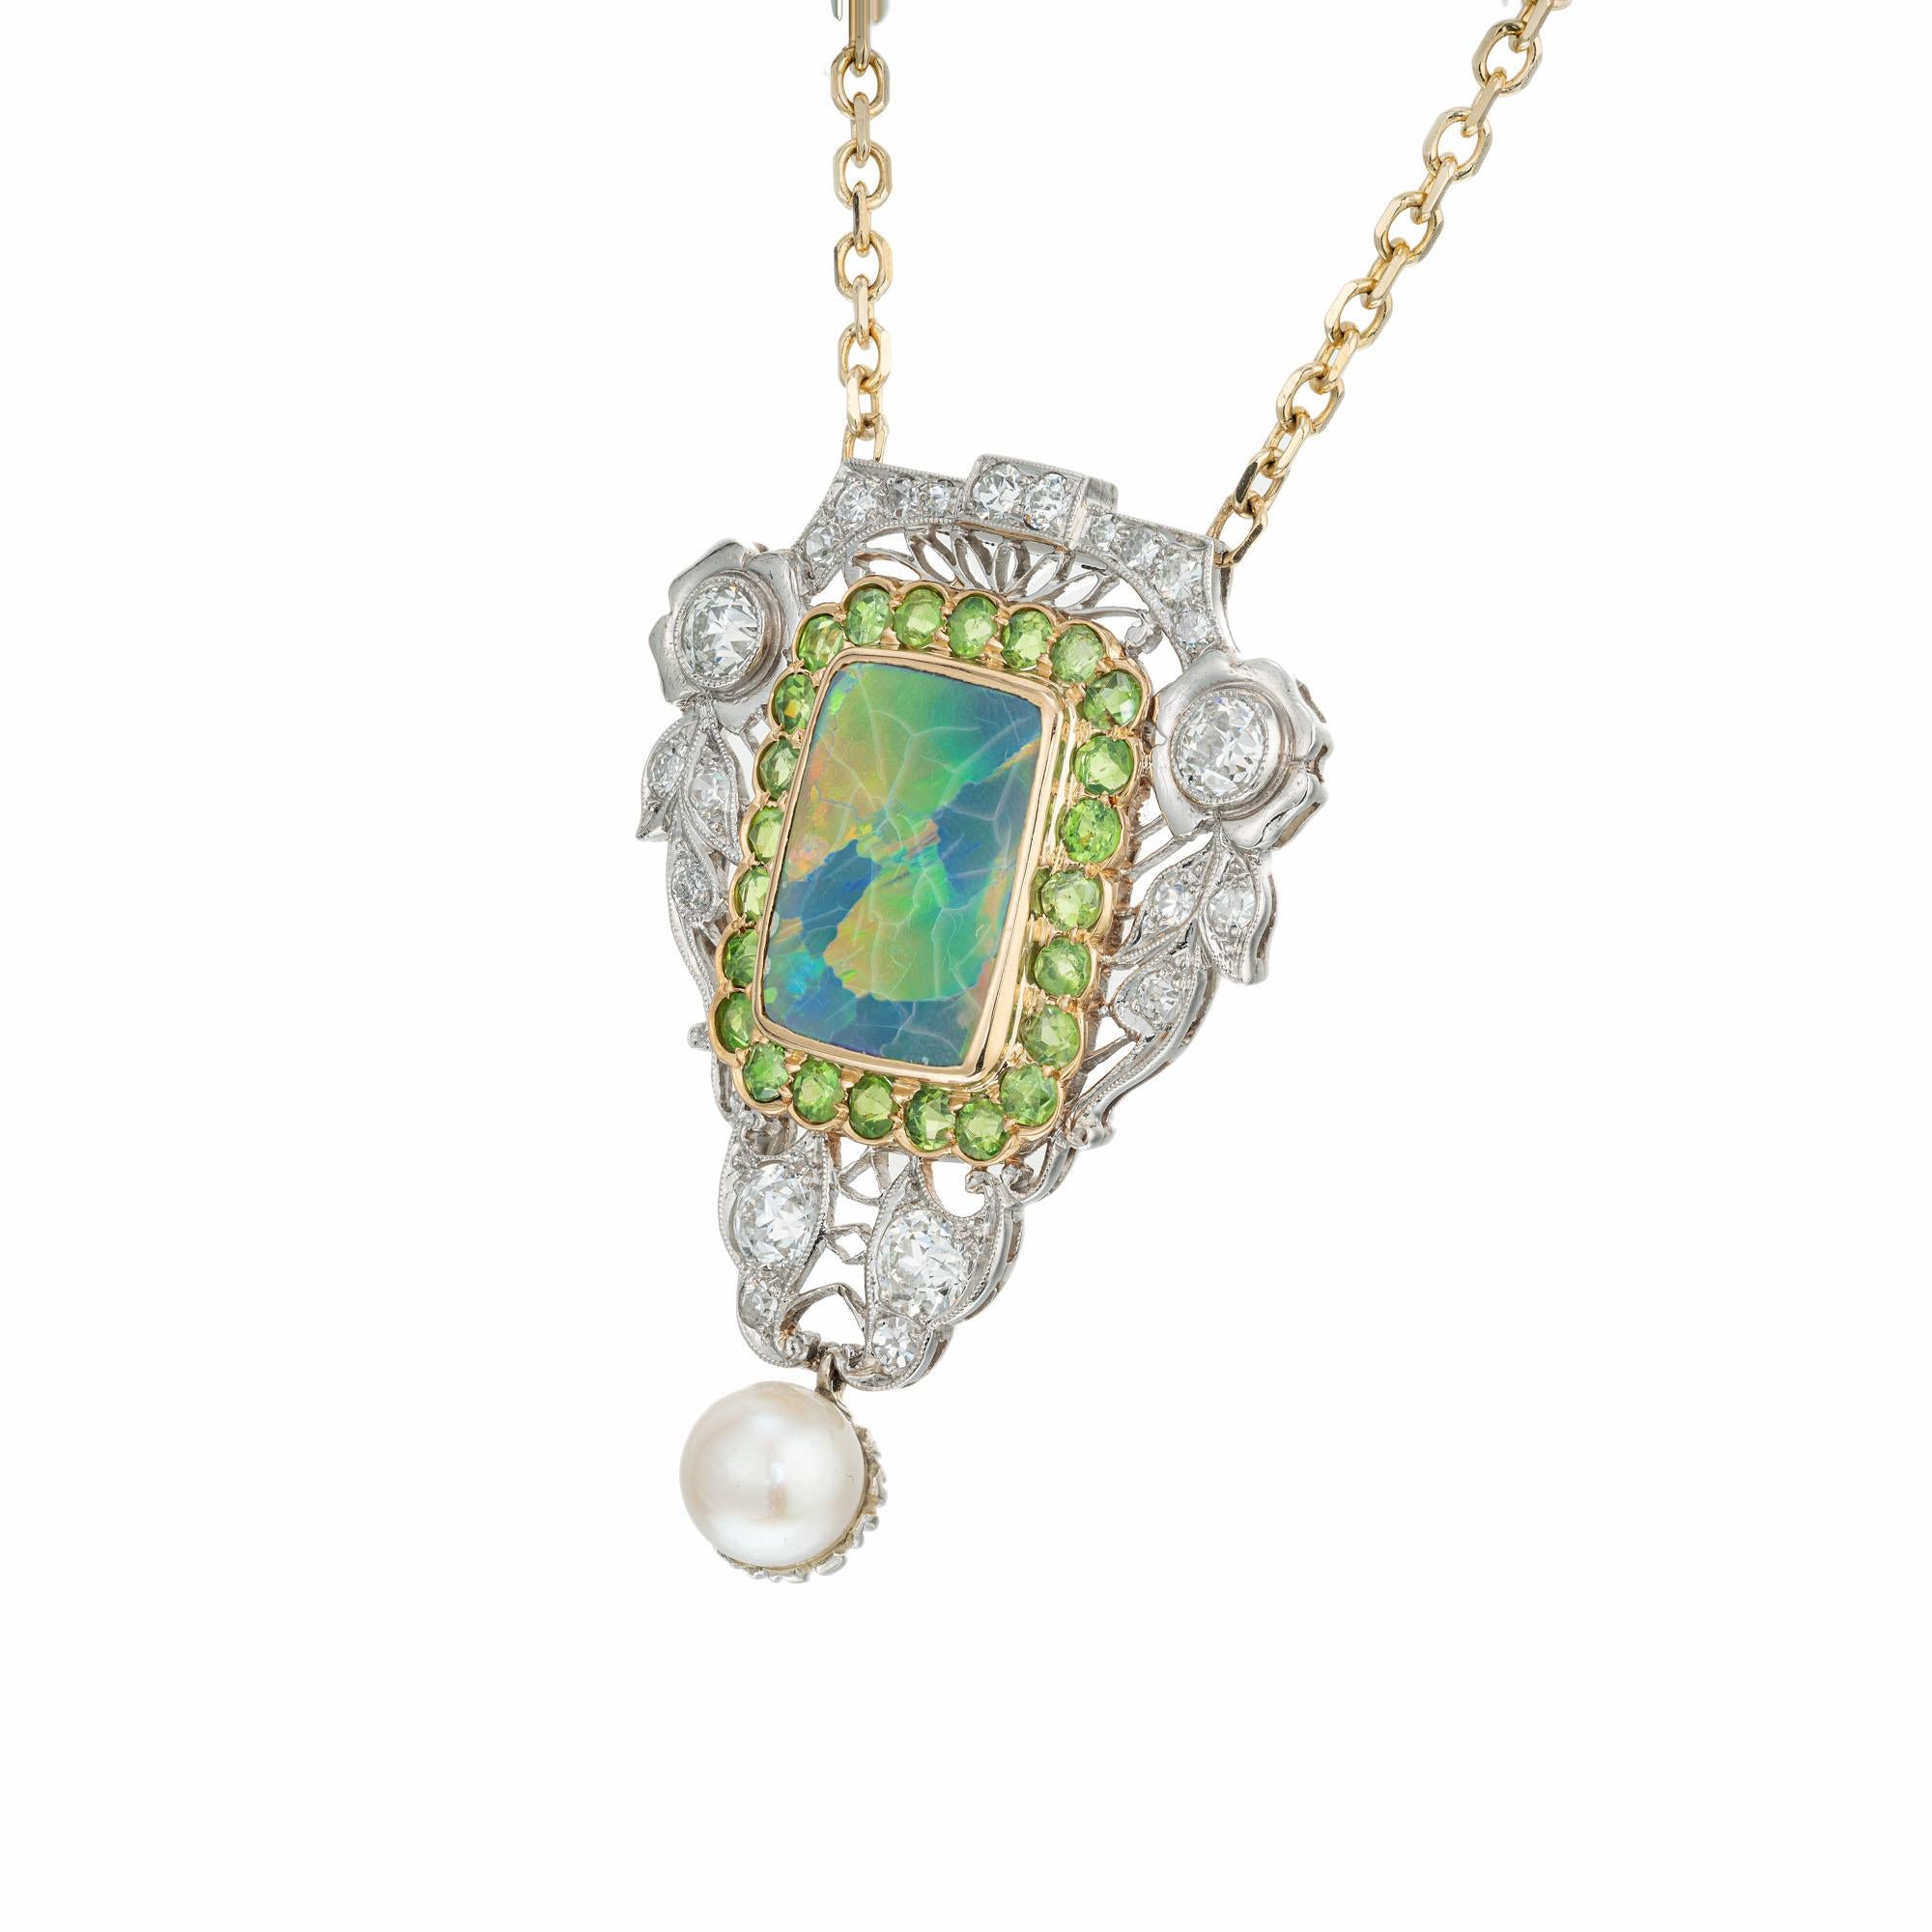 Original 1915 Edwardian opal, diamond and pearl pendant necklace. GIA certified 3.85ct center opal tablet in a handmade platinum and 18k yellow gold setting with 24 round old European cut green demantoid garnets, 4 old European cut diamonds, 18